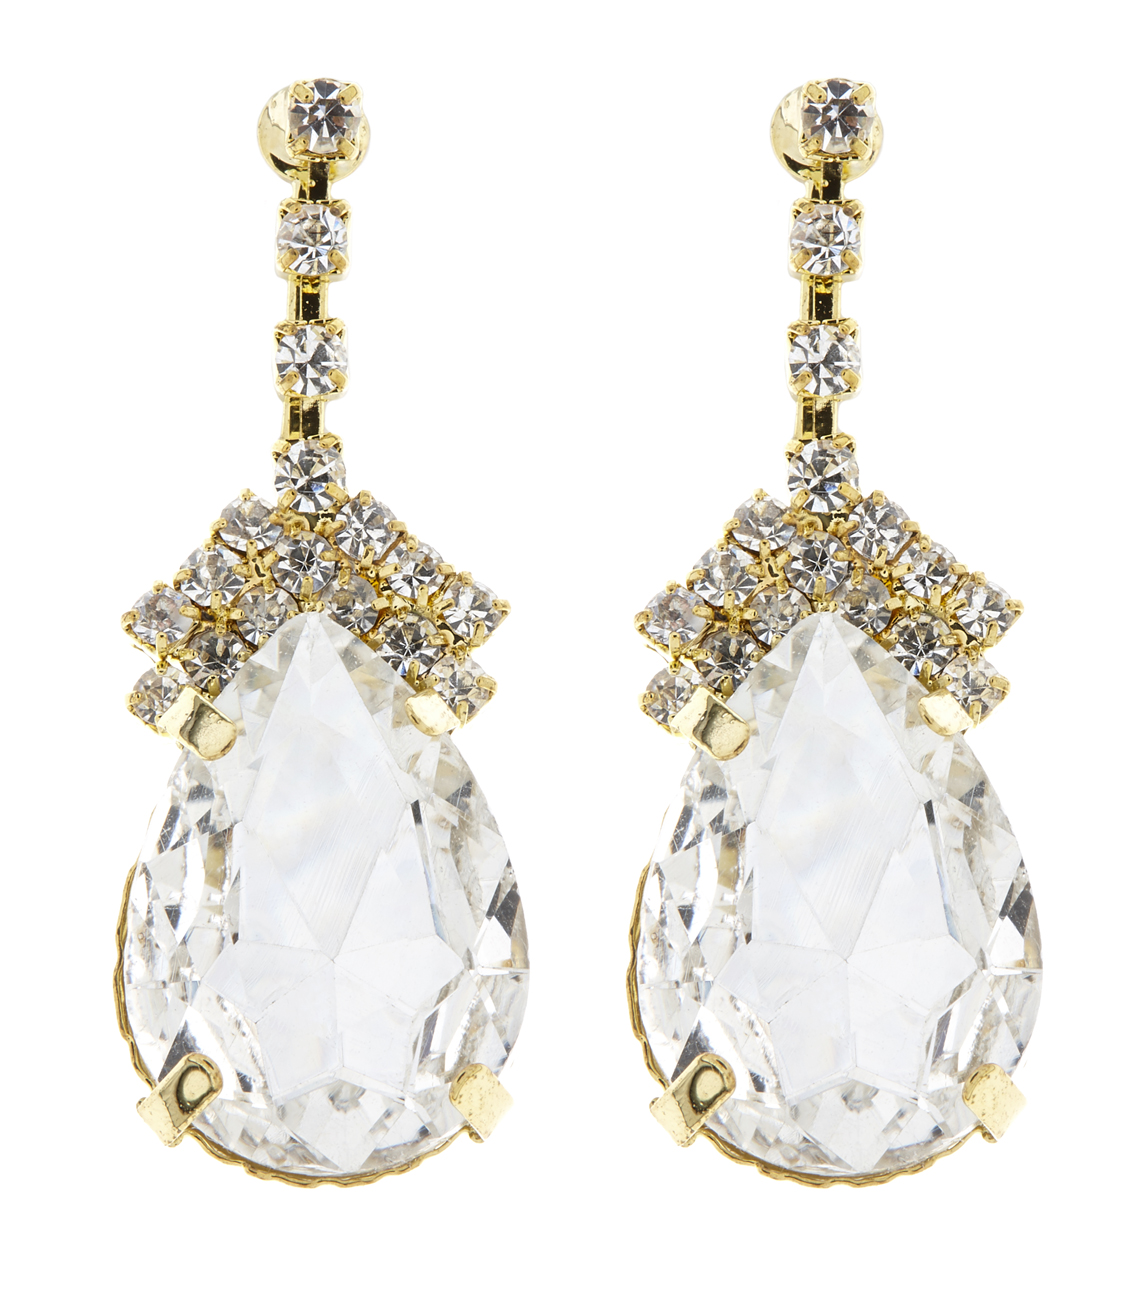 Clip on earrings - Meg - gold earring with an oval stone & clear cubic zirconia crystals